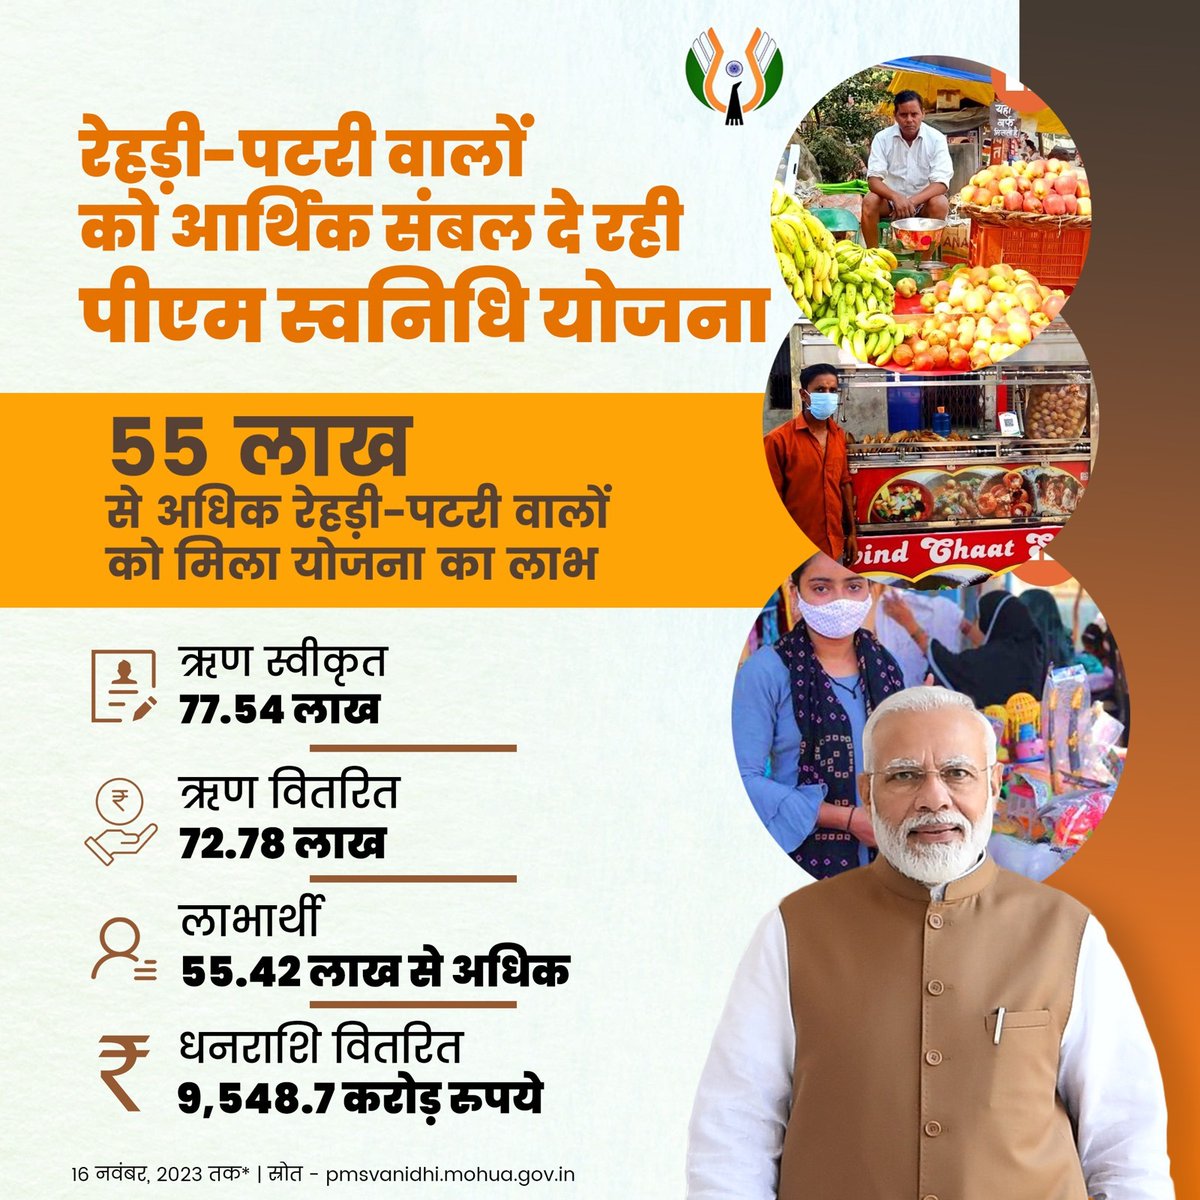 A transformative stride towards self-sufficiency! With the PM SVANidhi scheme, the Modi government has provided economic aid to over 55 lakh street vendors, fostering their journey to self-reliance. #EmpoweringStreetVendors #FinancialInclusion